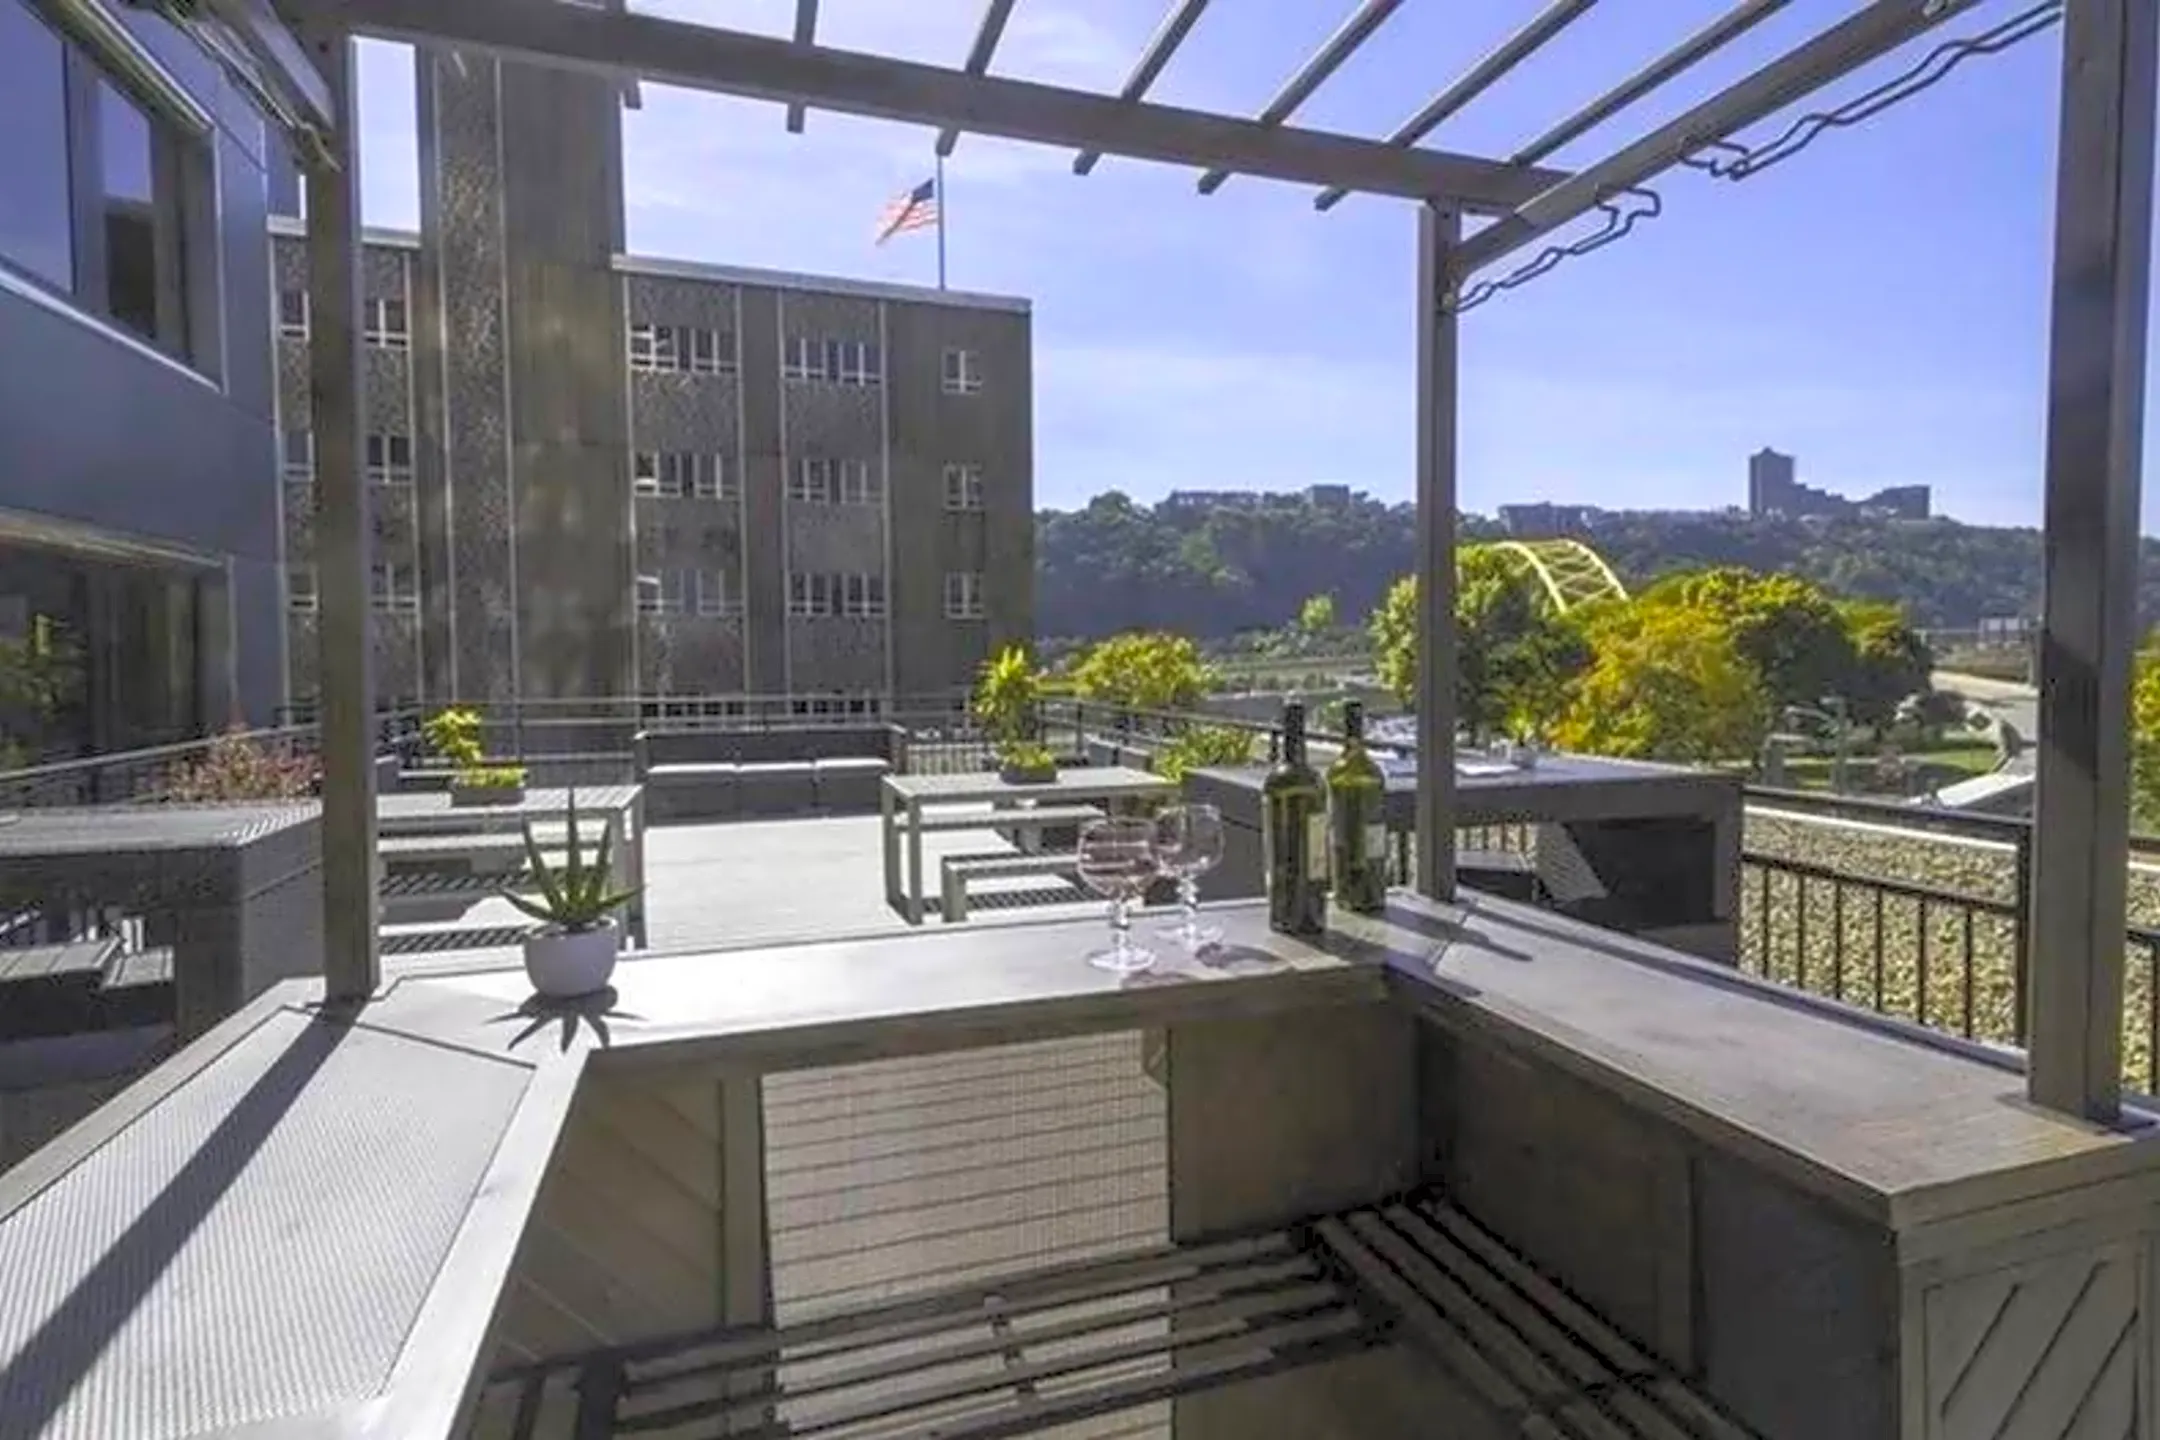 Patio / Deck - Apartments at River View - Pittsburgh, PA